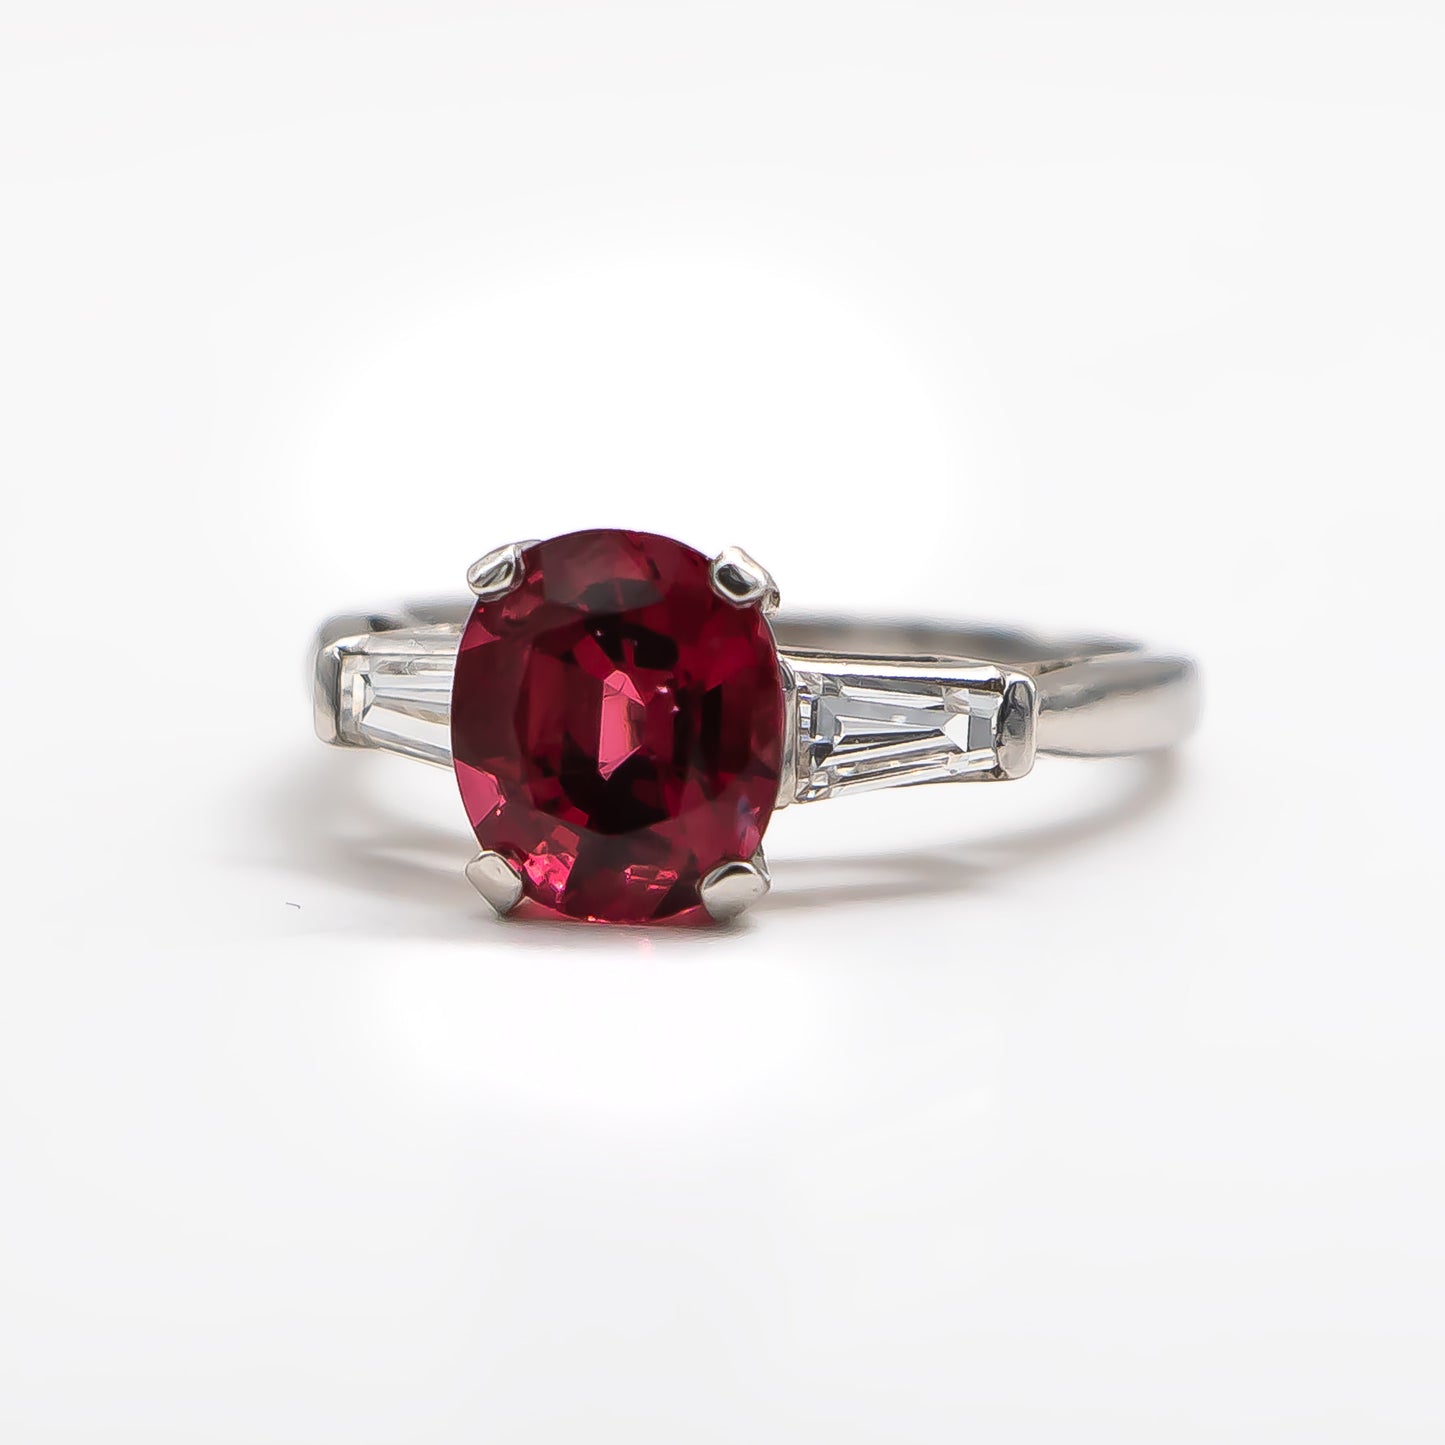 Hot Pink 2.80 Carat Spinel Ring With Diamonds 0.28 Carats